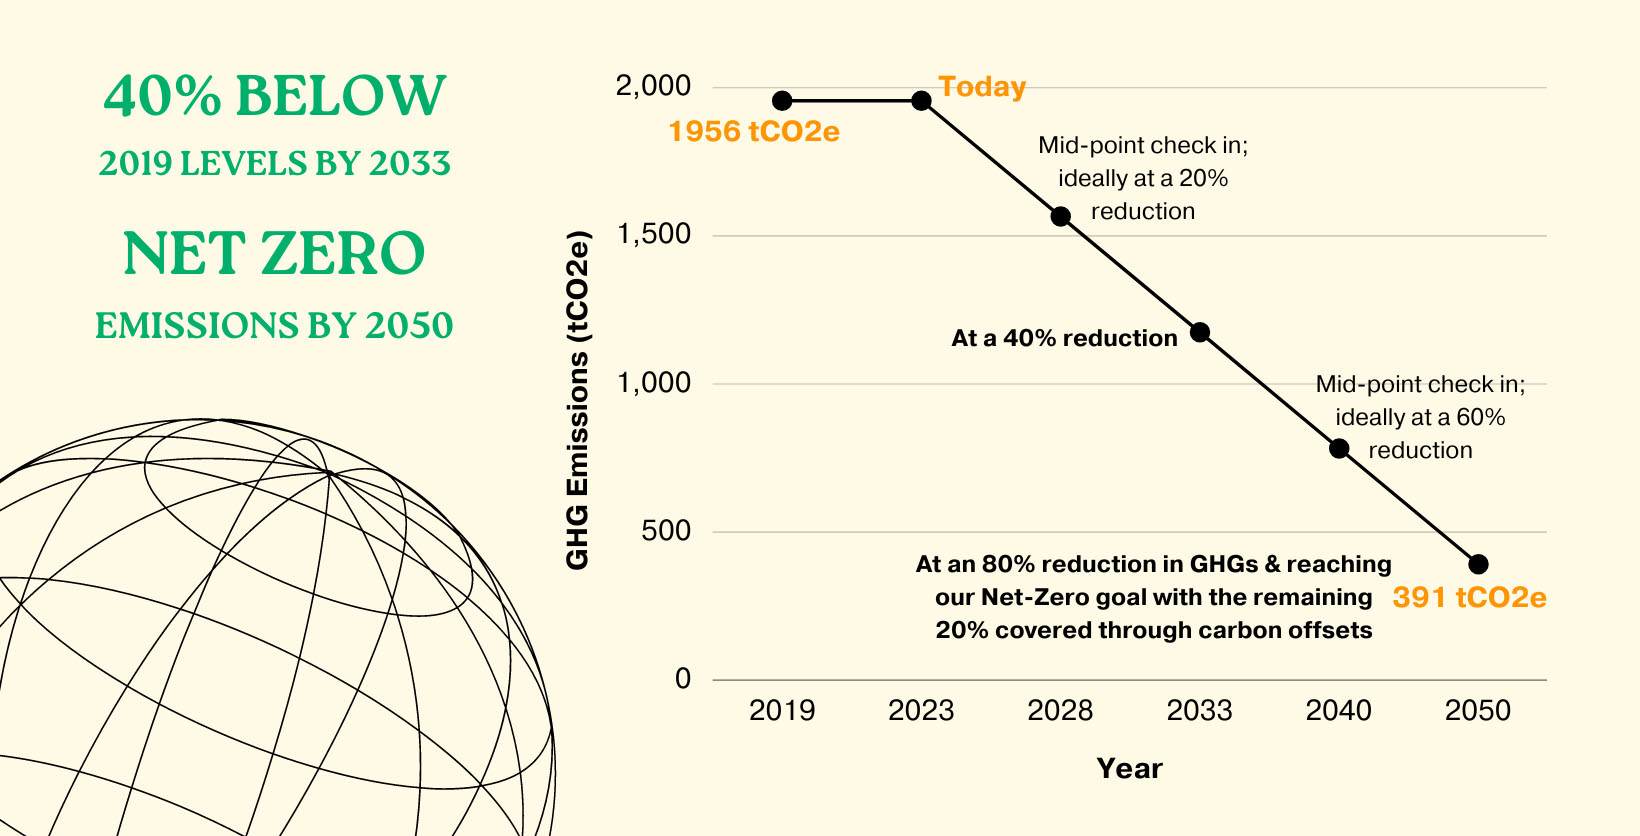 This graph shows the estimated reduction of corporate greenhouse gases from the baseline 2019 levels, with goals of a 40% reduction by 2033, and an 80% reduction by 2050. The remaining 20% of reduction will be reached through carbon offsets.